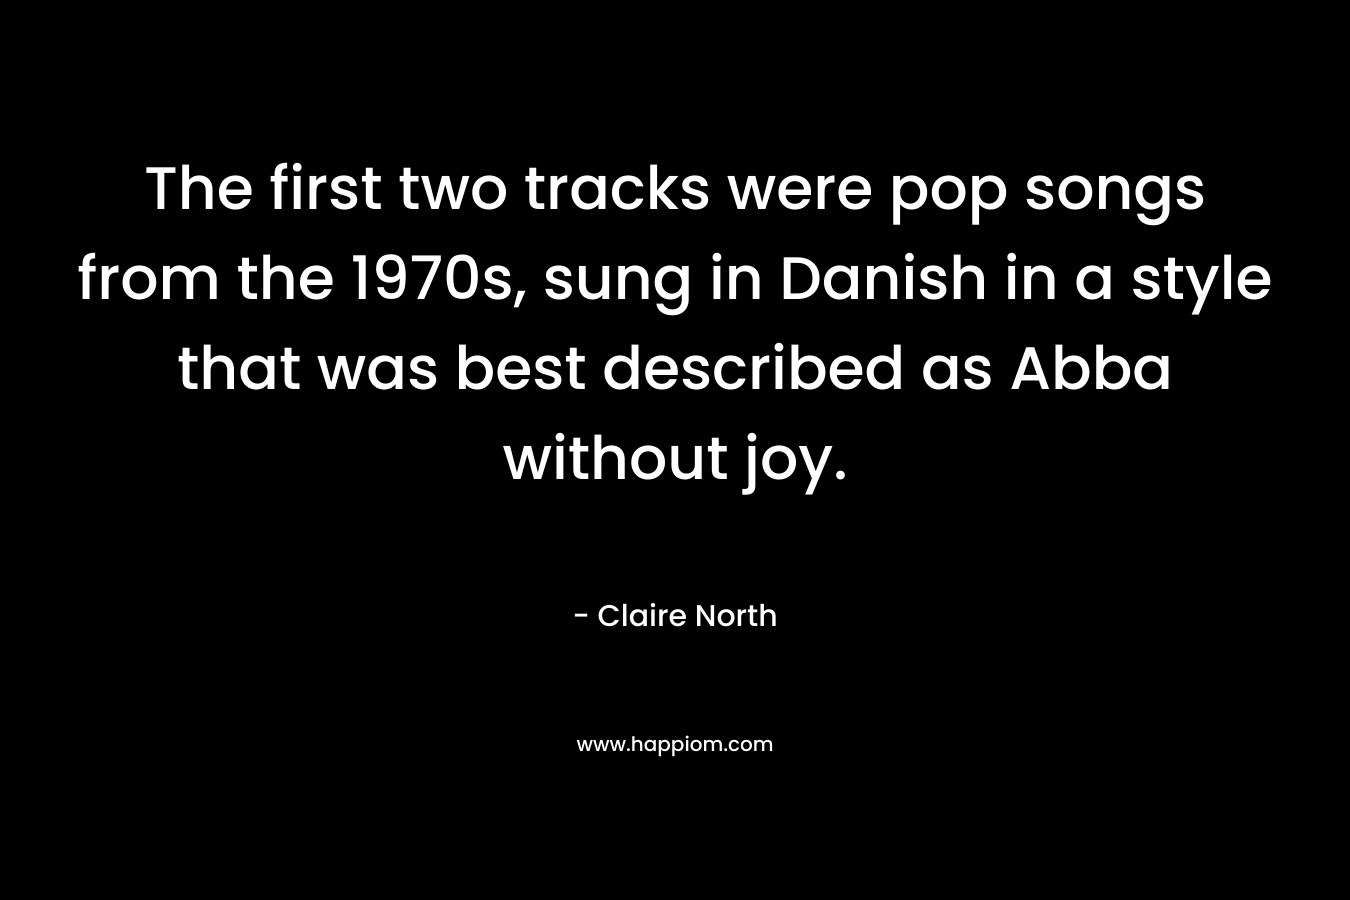 The first two tracks were pop songs from the 1970s, sung in Danish in a style that was best described as Abba without joy. – Claire North